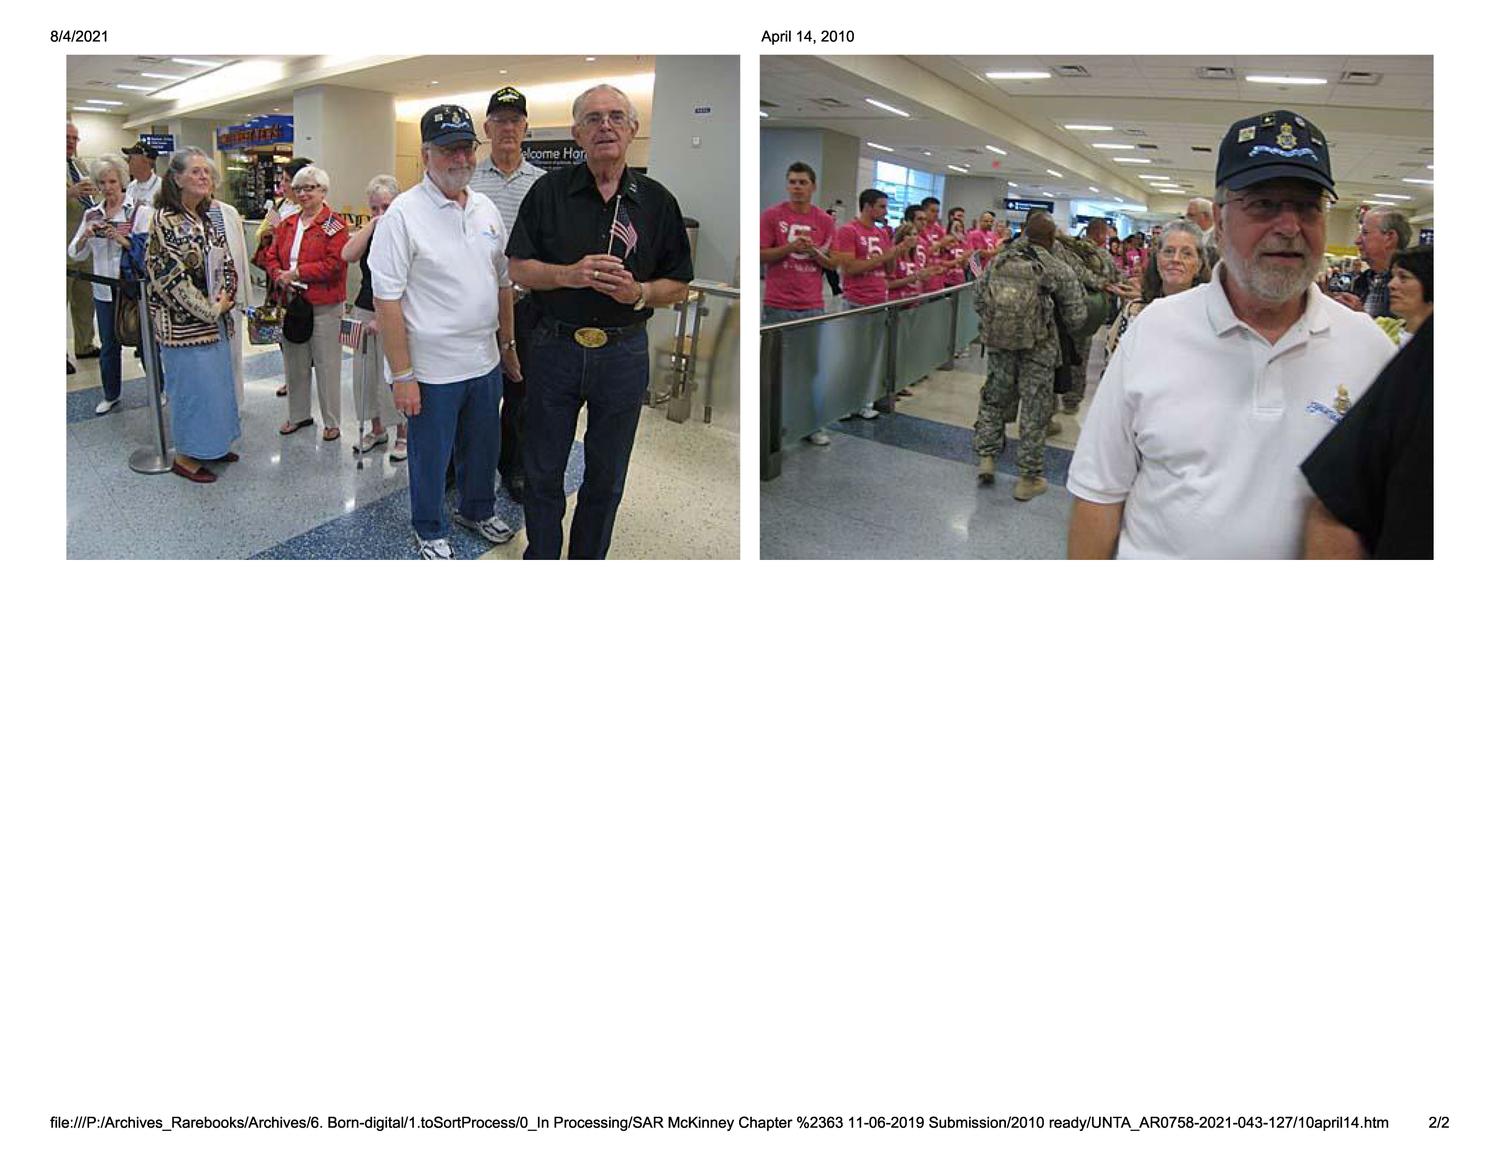 McKinney SAR Chapter greeted troops at DFW Airport
                                                
                                                    [Sequence #]: 2 of 2
                                                